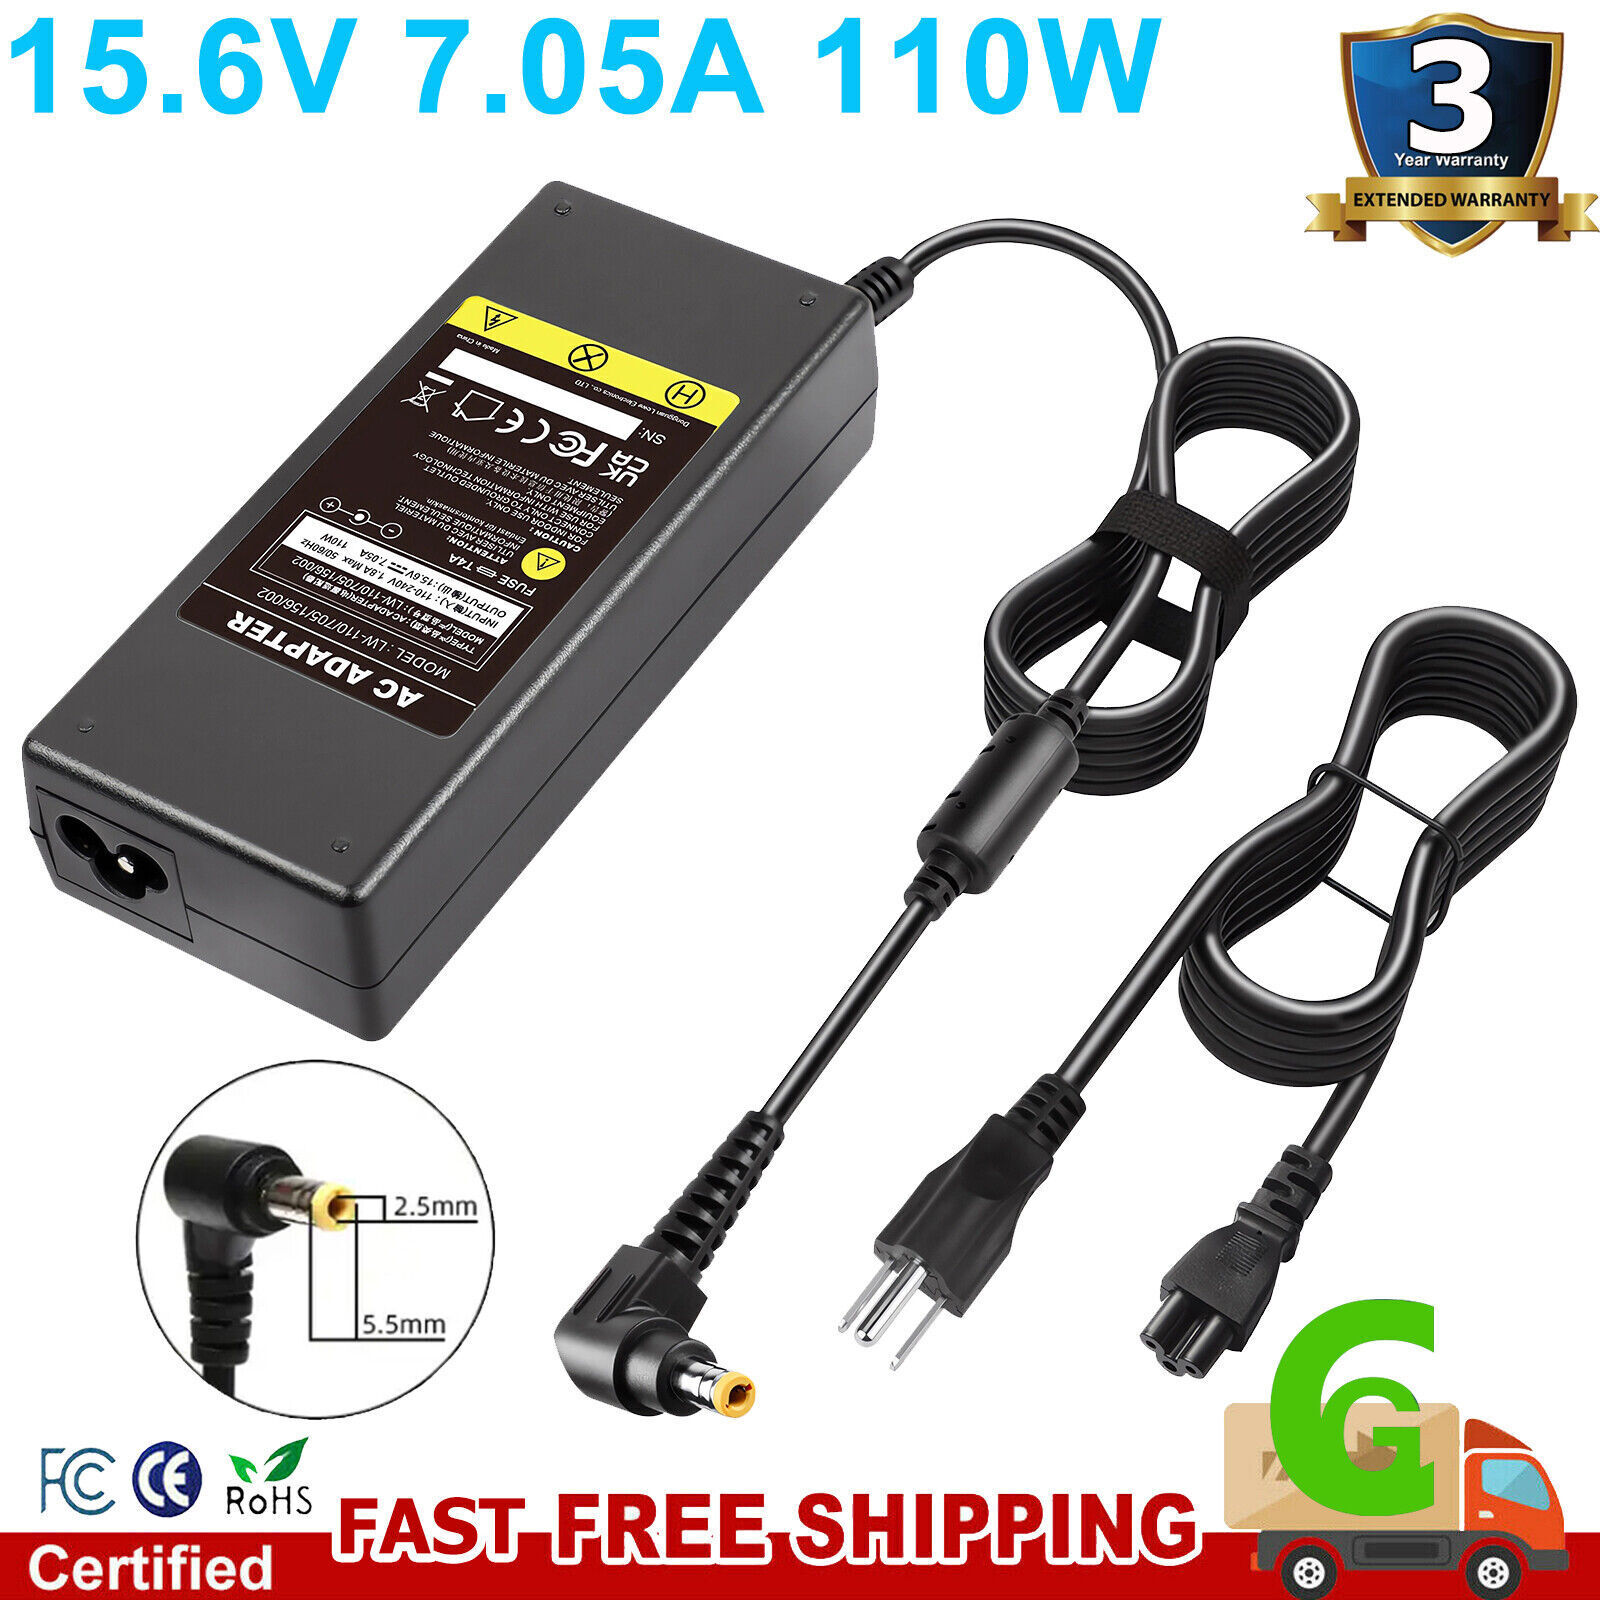 15.6V 7.05A 110W AC Adapter Power Charger For Panasonic CF-AA5713A CF-AA5713AM 